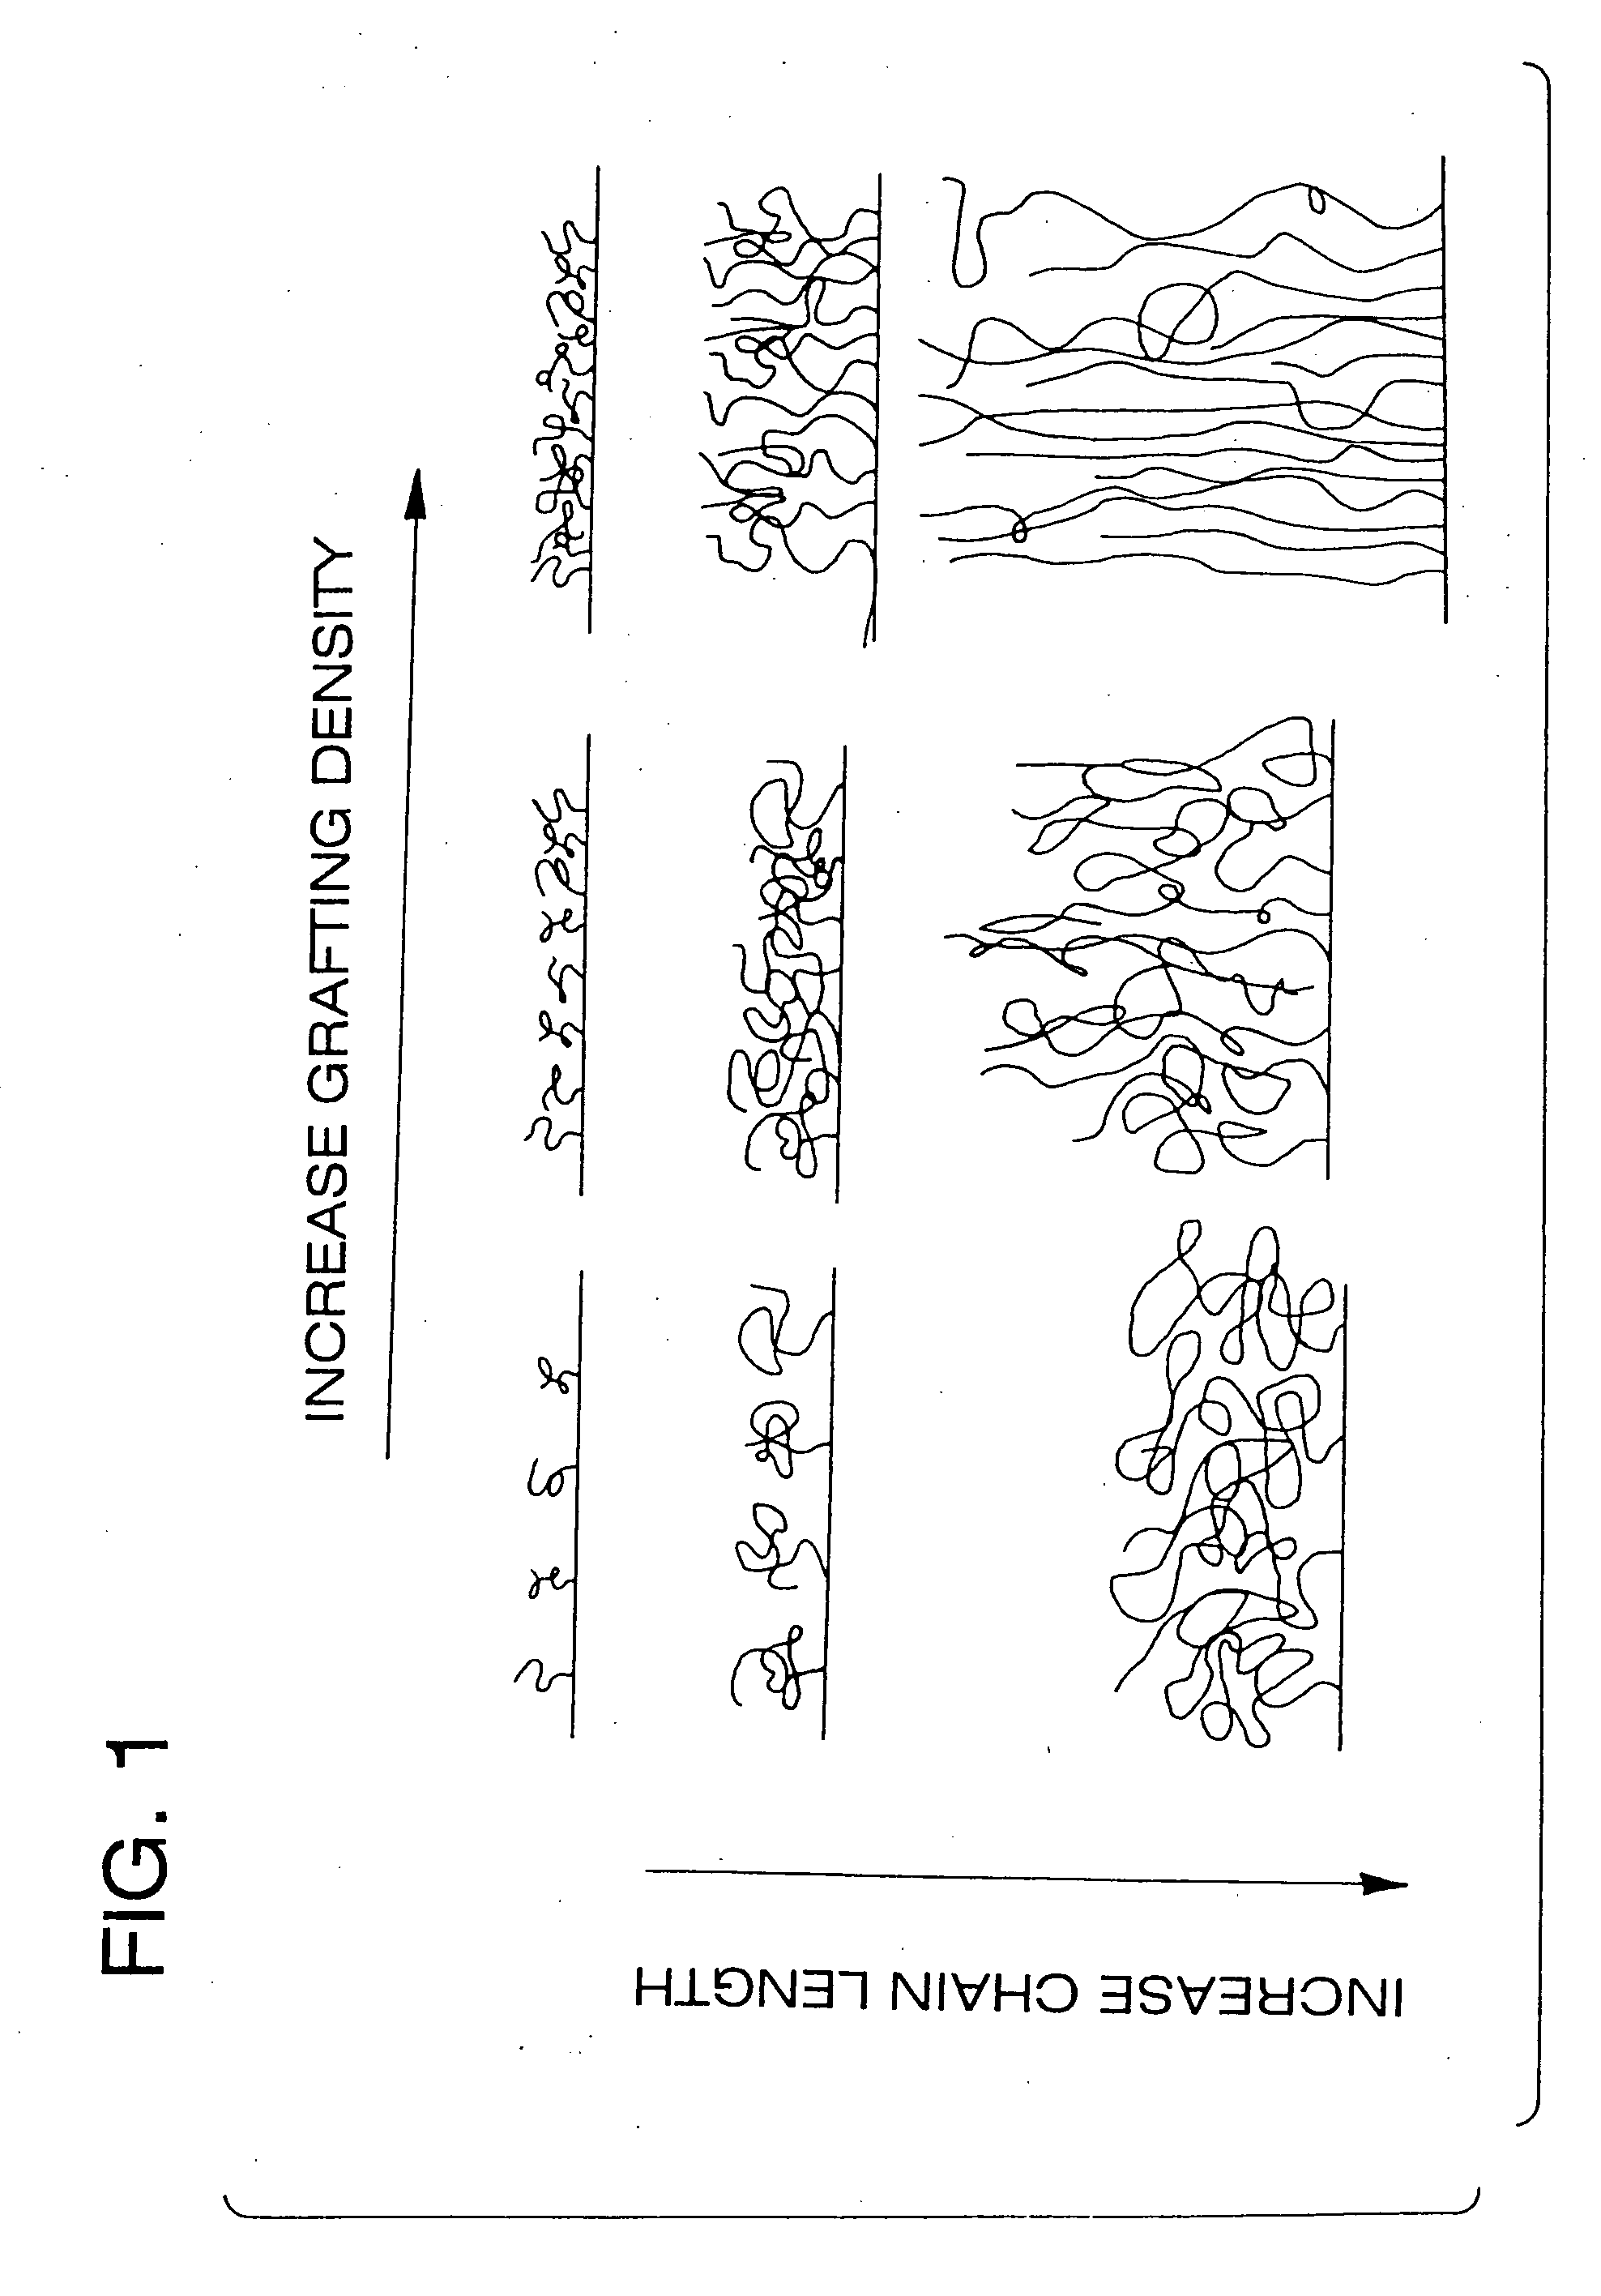 Polymer brushes for immobilizing molecules to a surface and having water-soluble or water-dispersible segments therein and probes bonded thereto